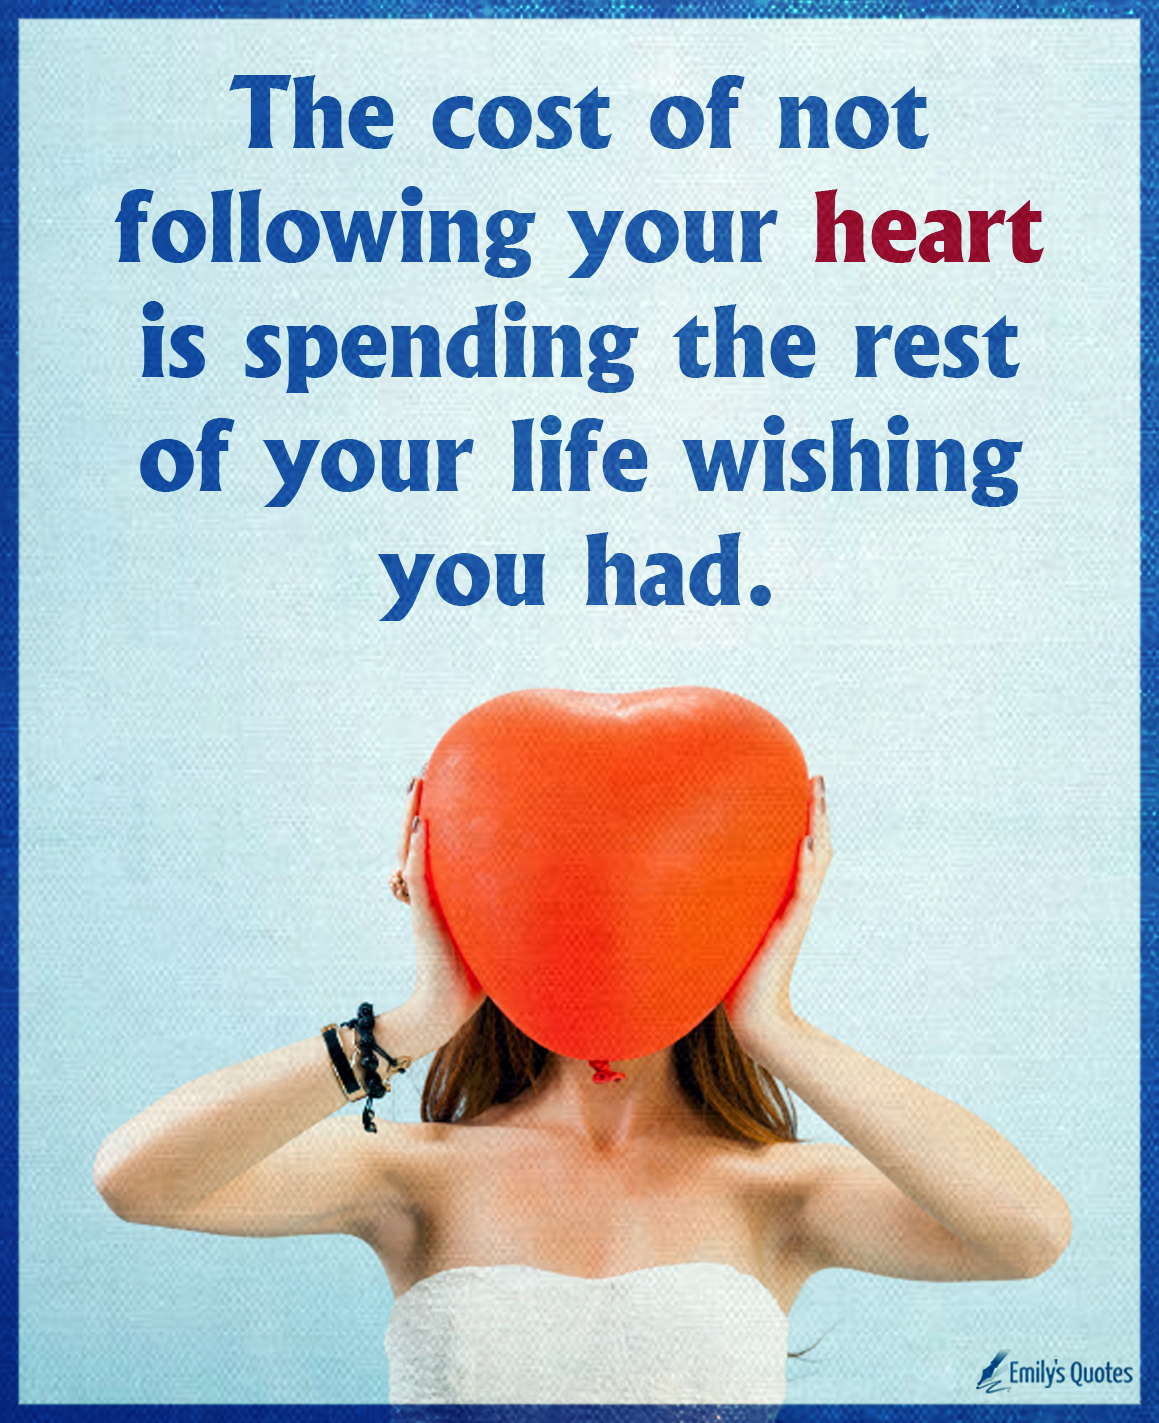 The cost of not following your heart is spending the rest of your life